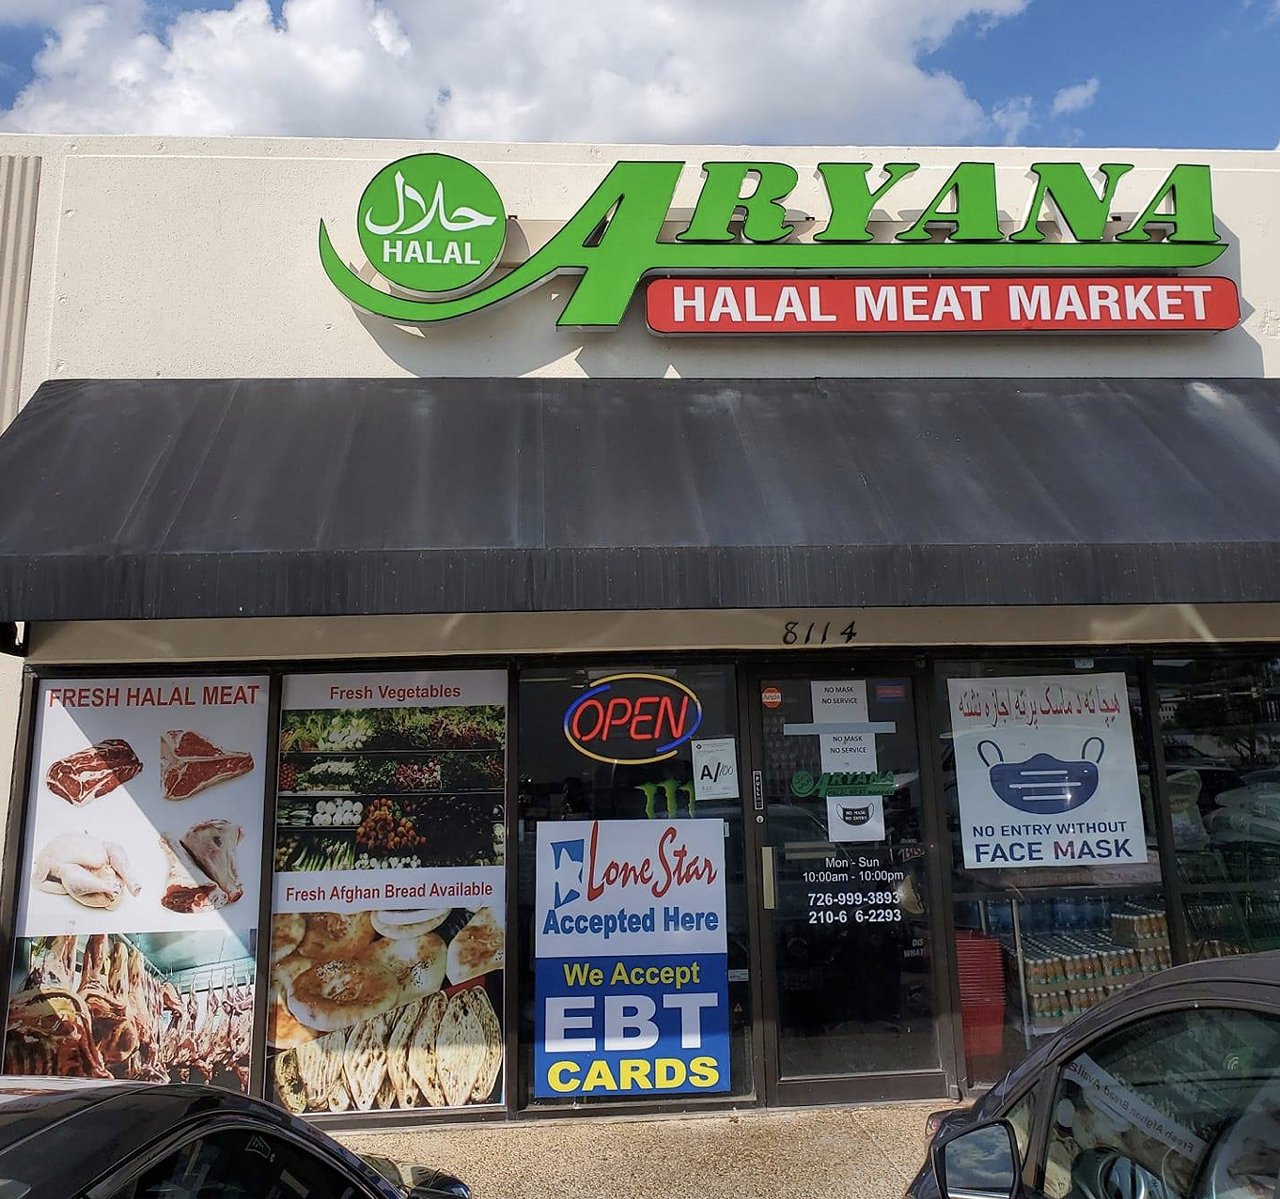 Aryana Halal Meat Market
8114 Fredericksburg Rd, (726) 999-3893, facebook.com/aryanahalalmeatmarket
Stroll on into this middle eastern grocery for halal meat, fresh veggies and Afghan dry fruits. Mango lovers should definitely have this place on their go-to list — the spot offers them nearly year-round.  
Photo via Facebook / Aryana Halal